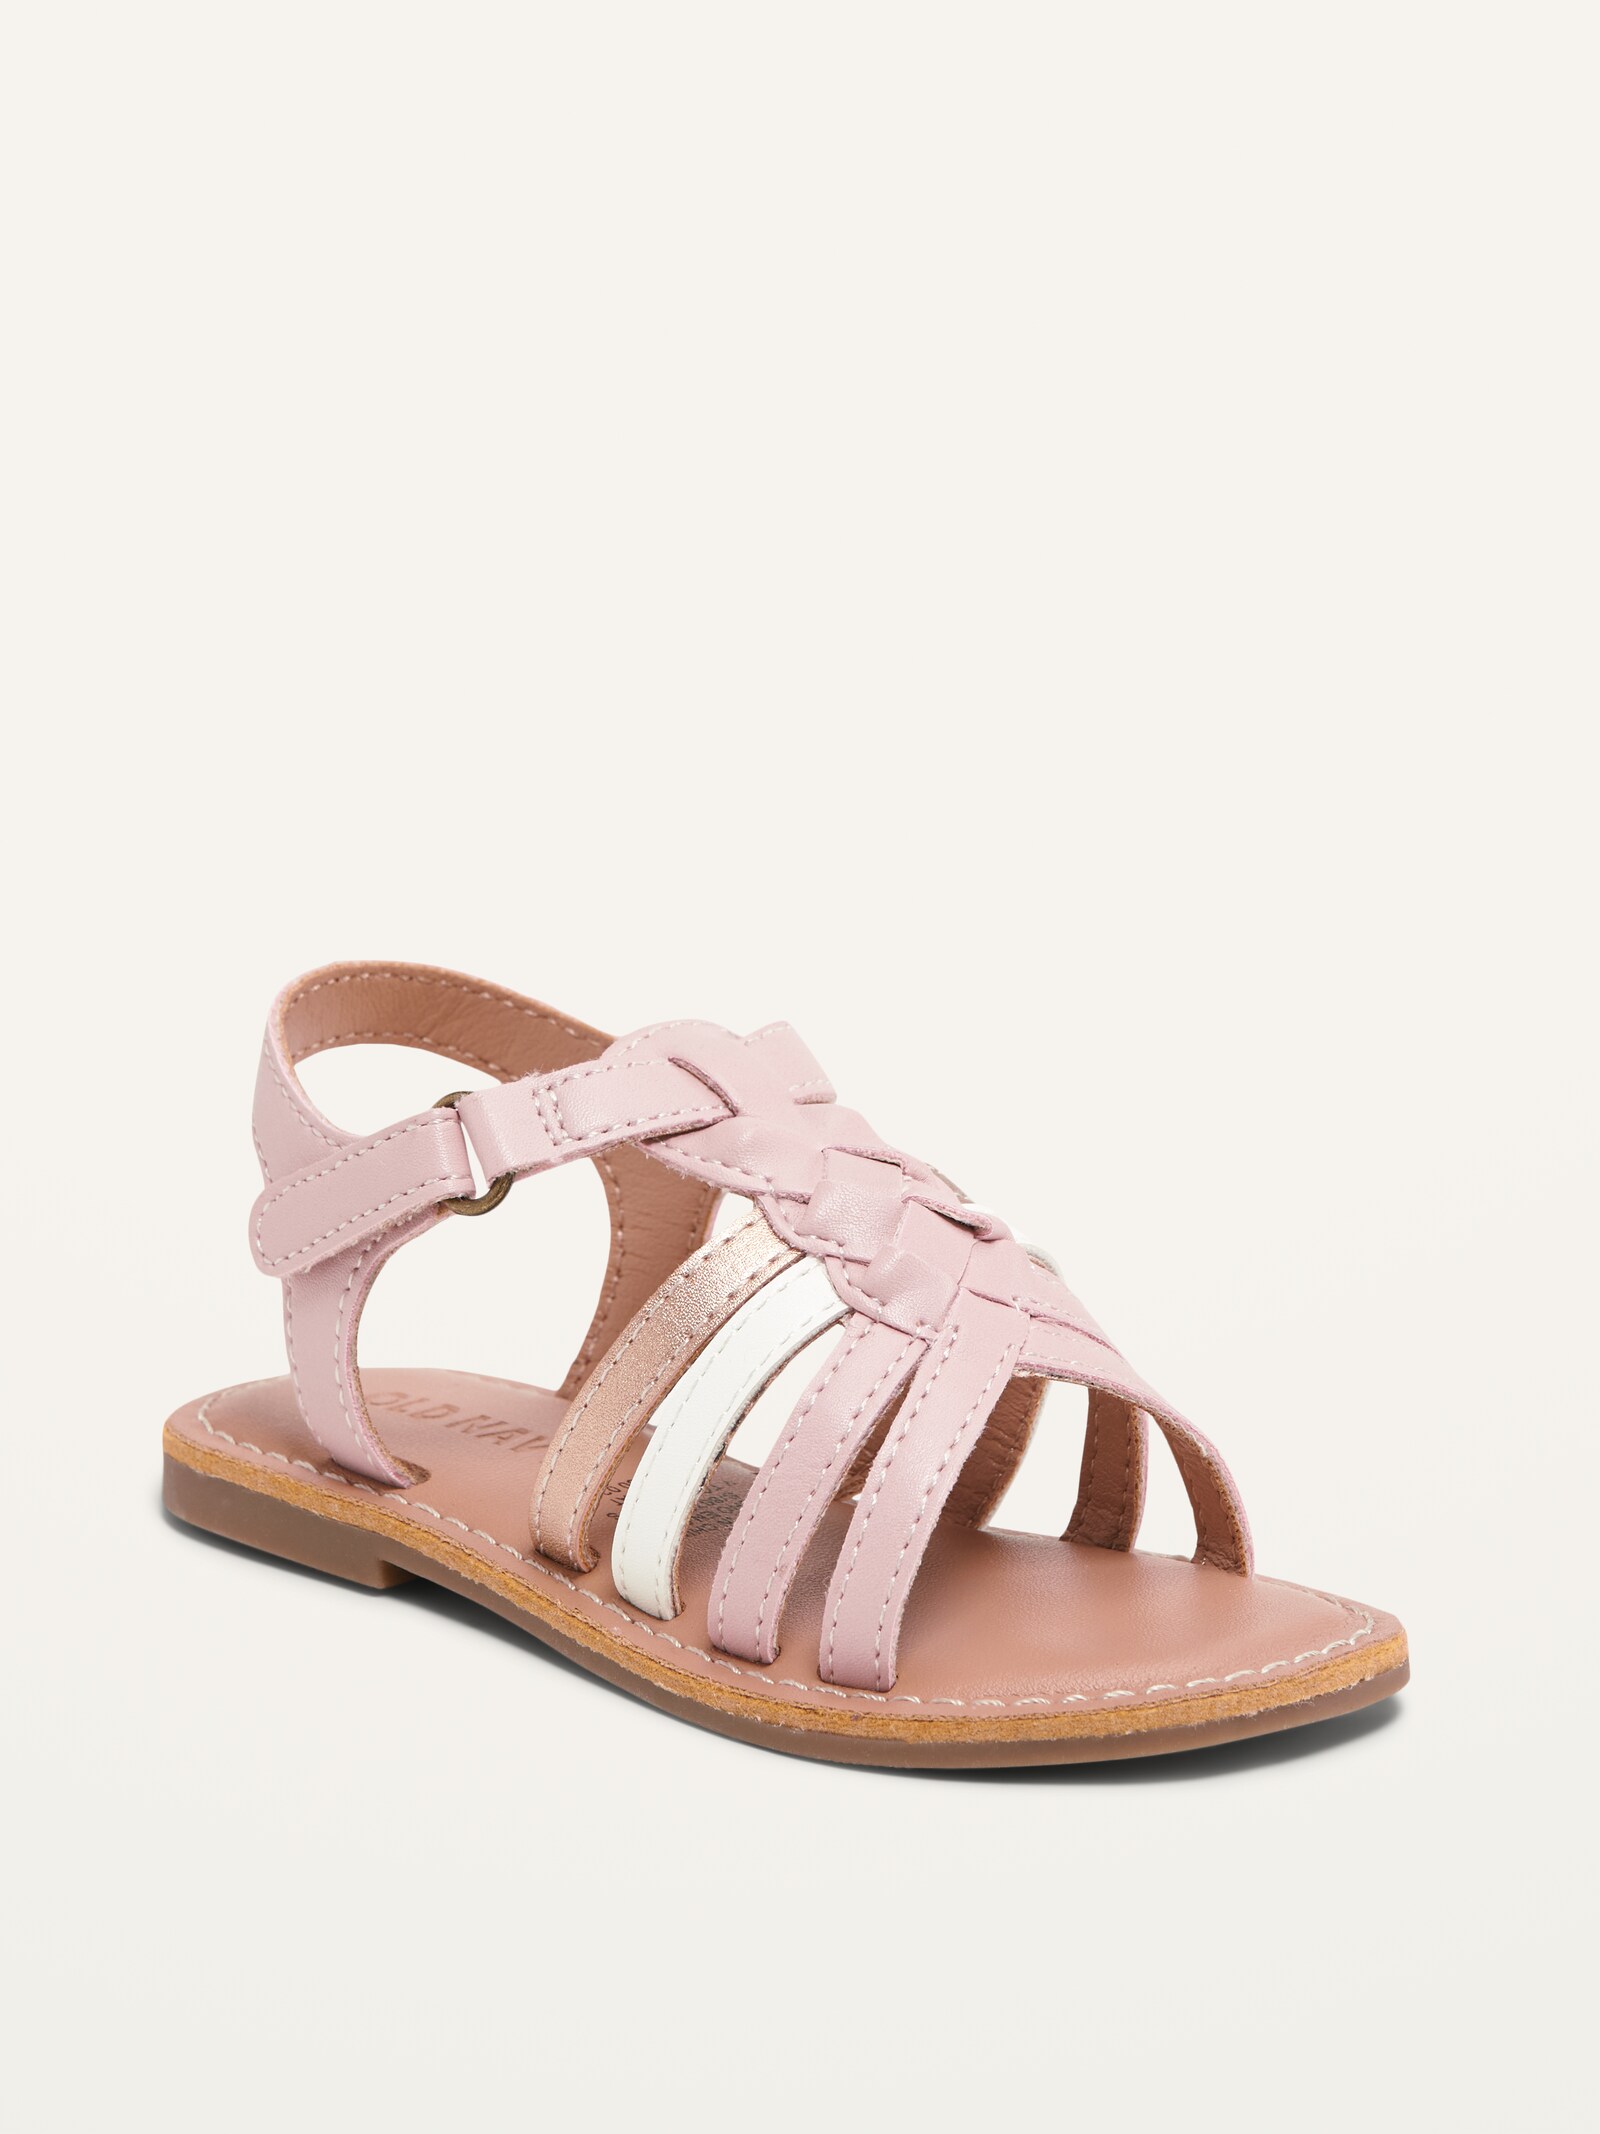 baby Gap NWT Girl's 6 7 8 9 10 Faux Leather Pink Braided Strap Strappy Sandals 